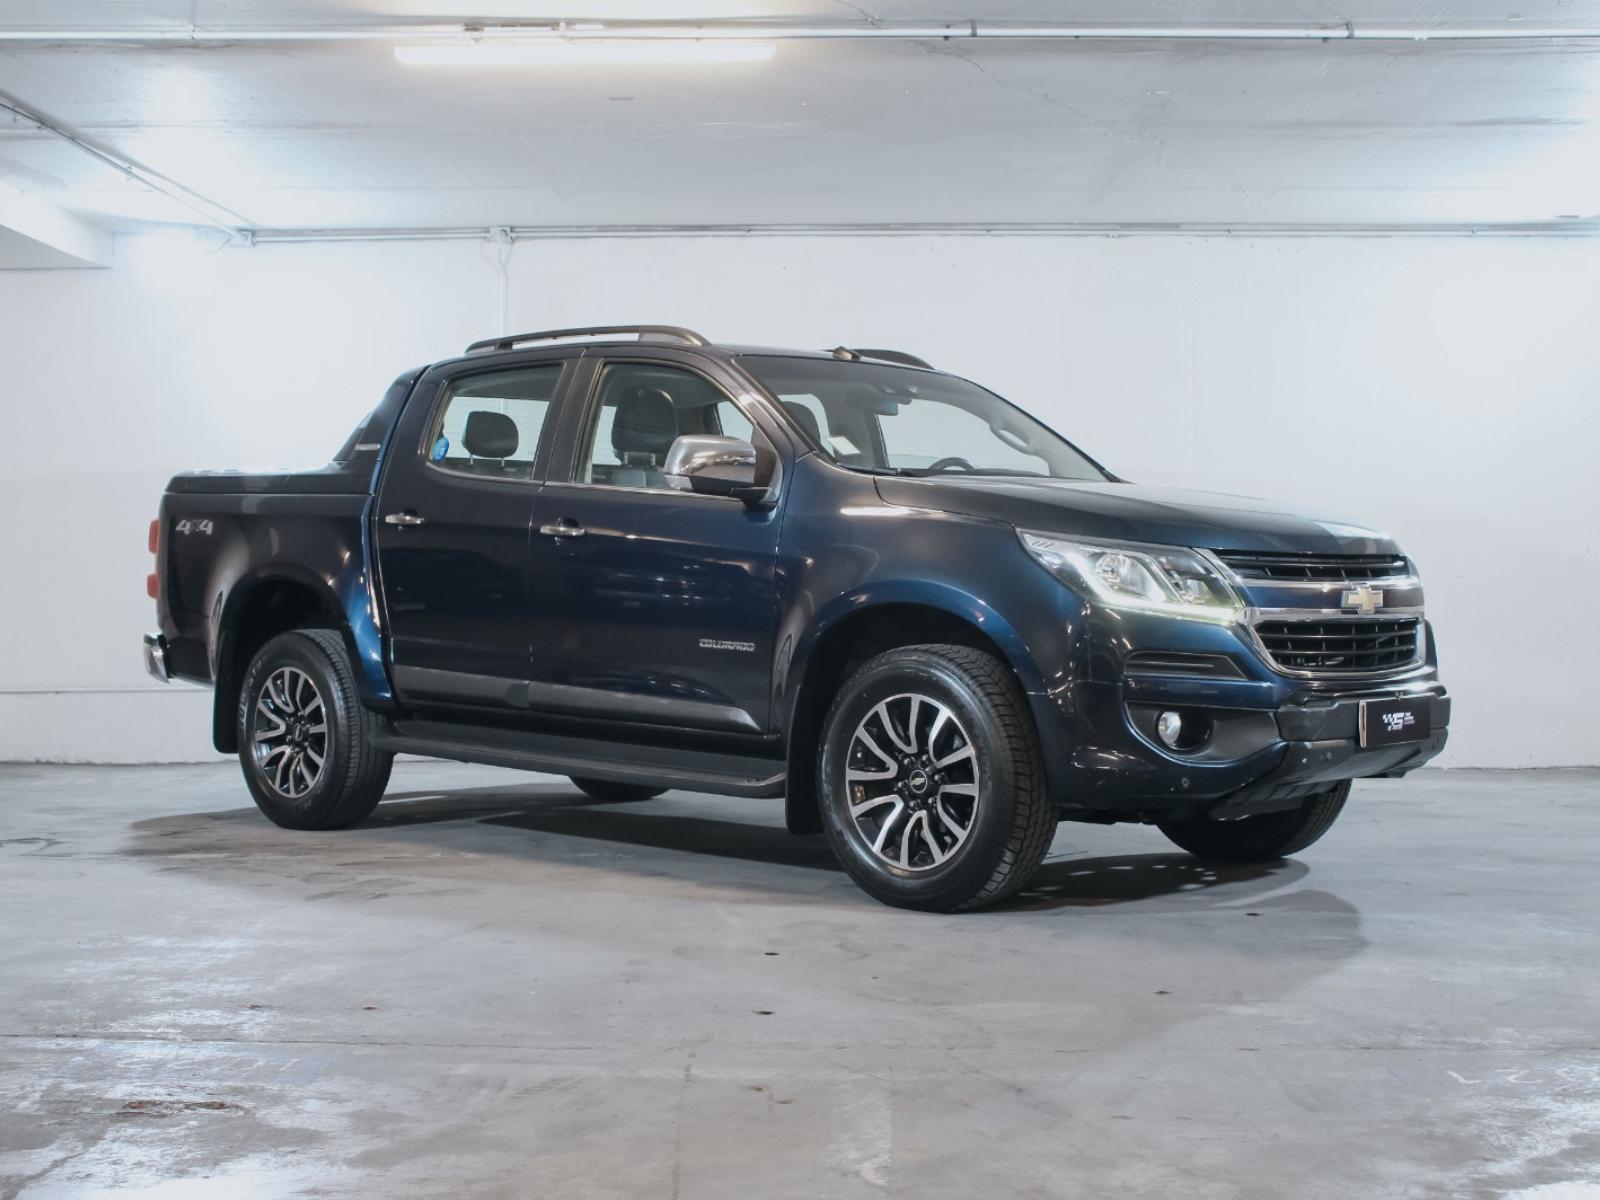 CHEVROLET COLORADO HIGH COUNTRY 2.8 D 4WD 2020 - FULL MOTOR